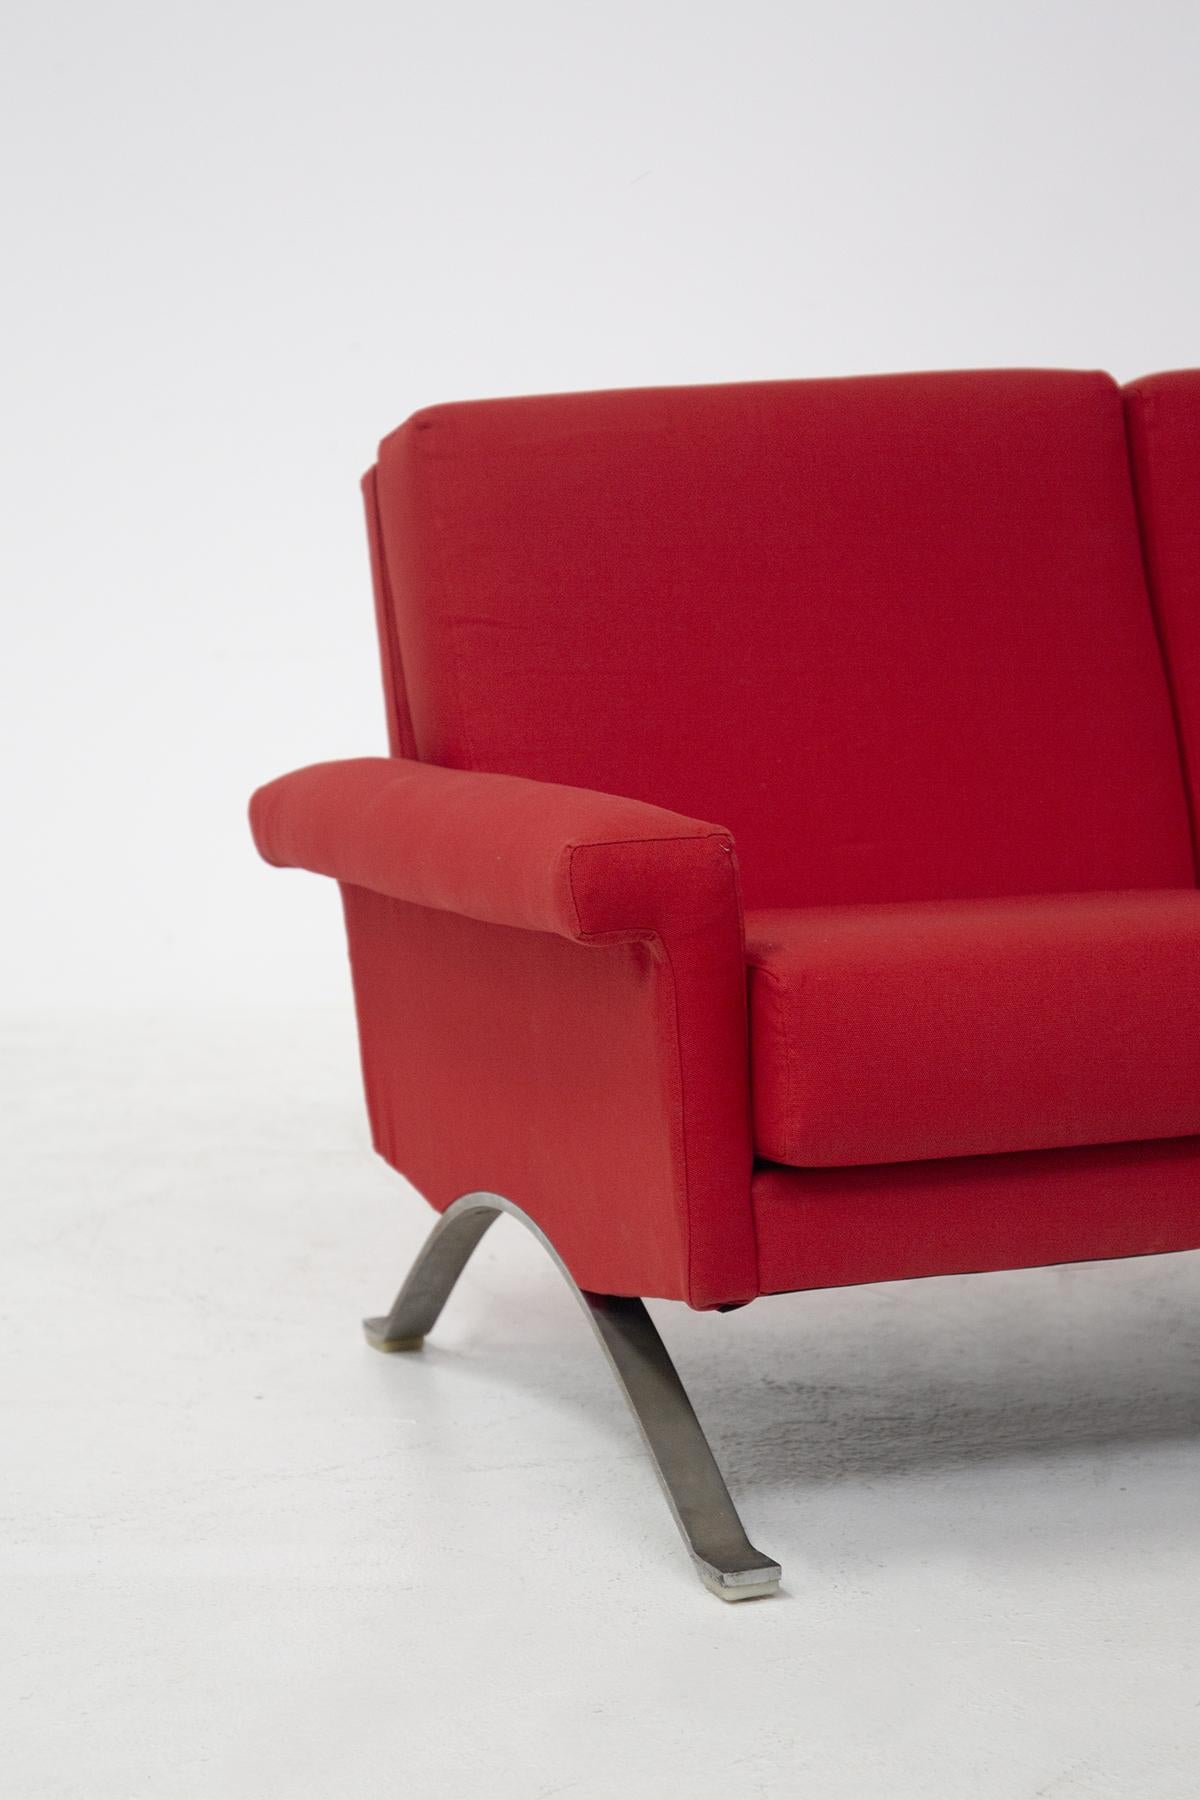 Mid-20th Century Rare Italian Red Sofa by Ico Parisi for Cassina Mod. 875, Published For Sale